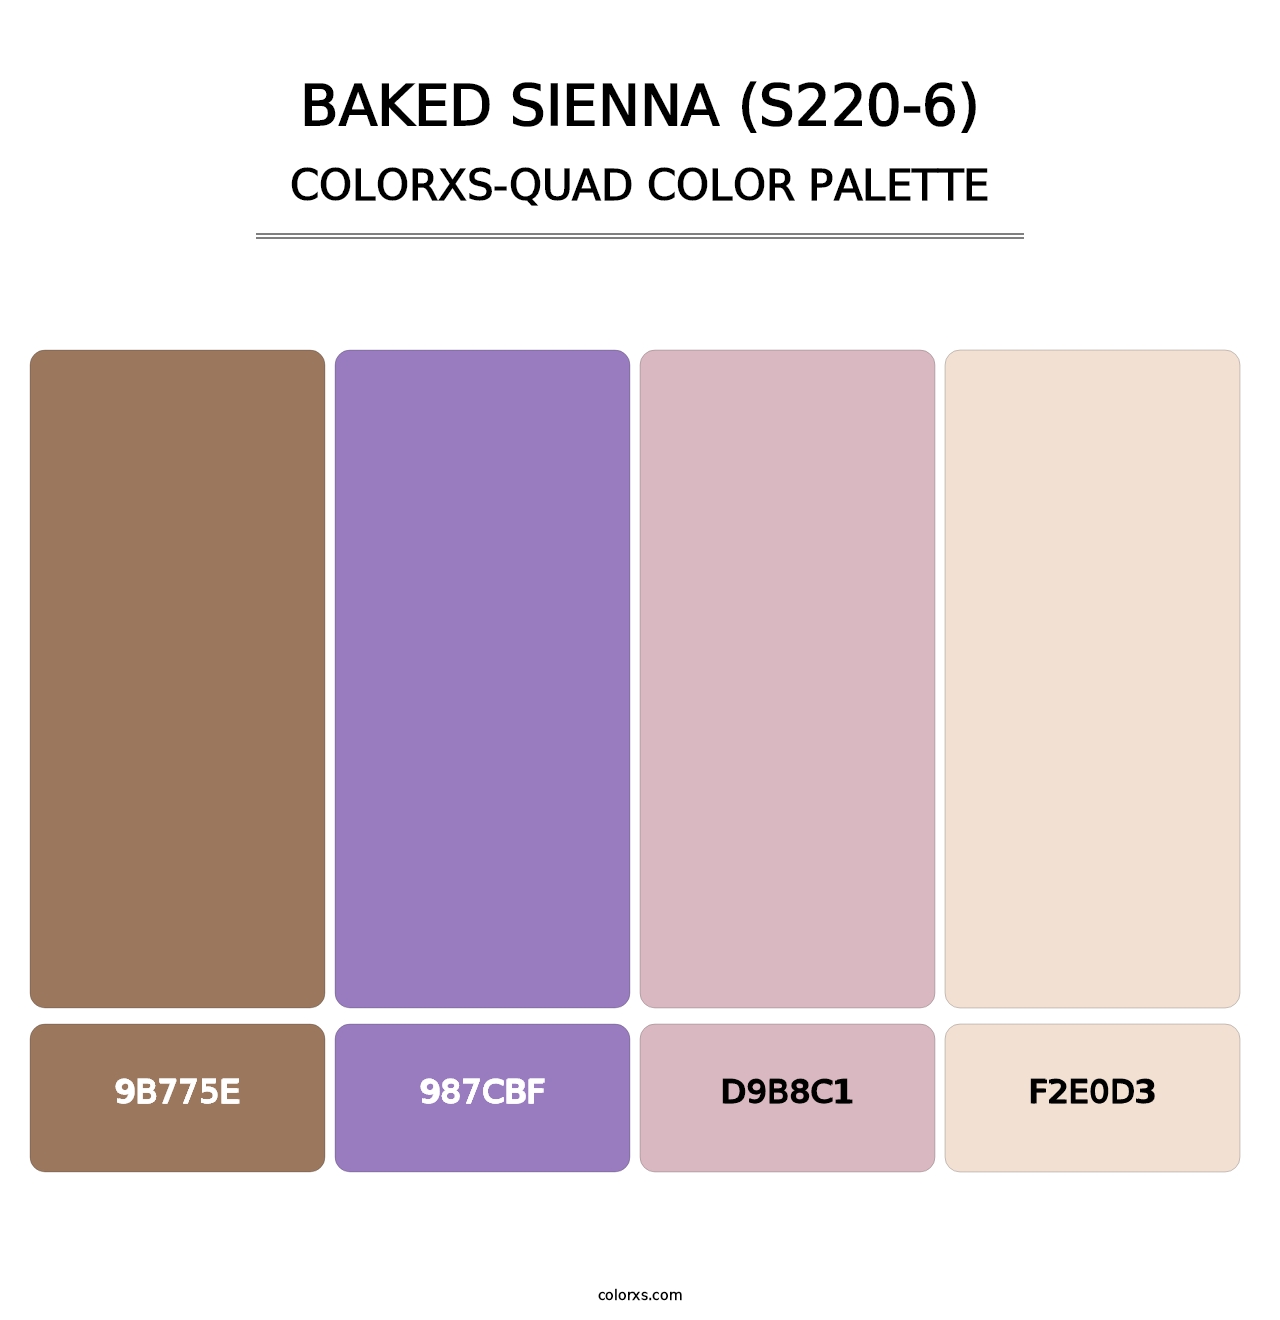 Baked Sienna (S220-6) - Colorxs Quad Palette